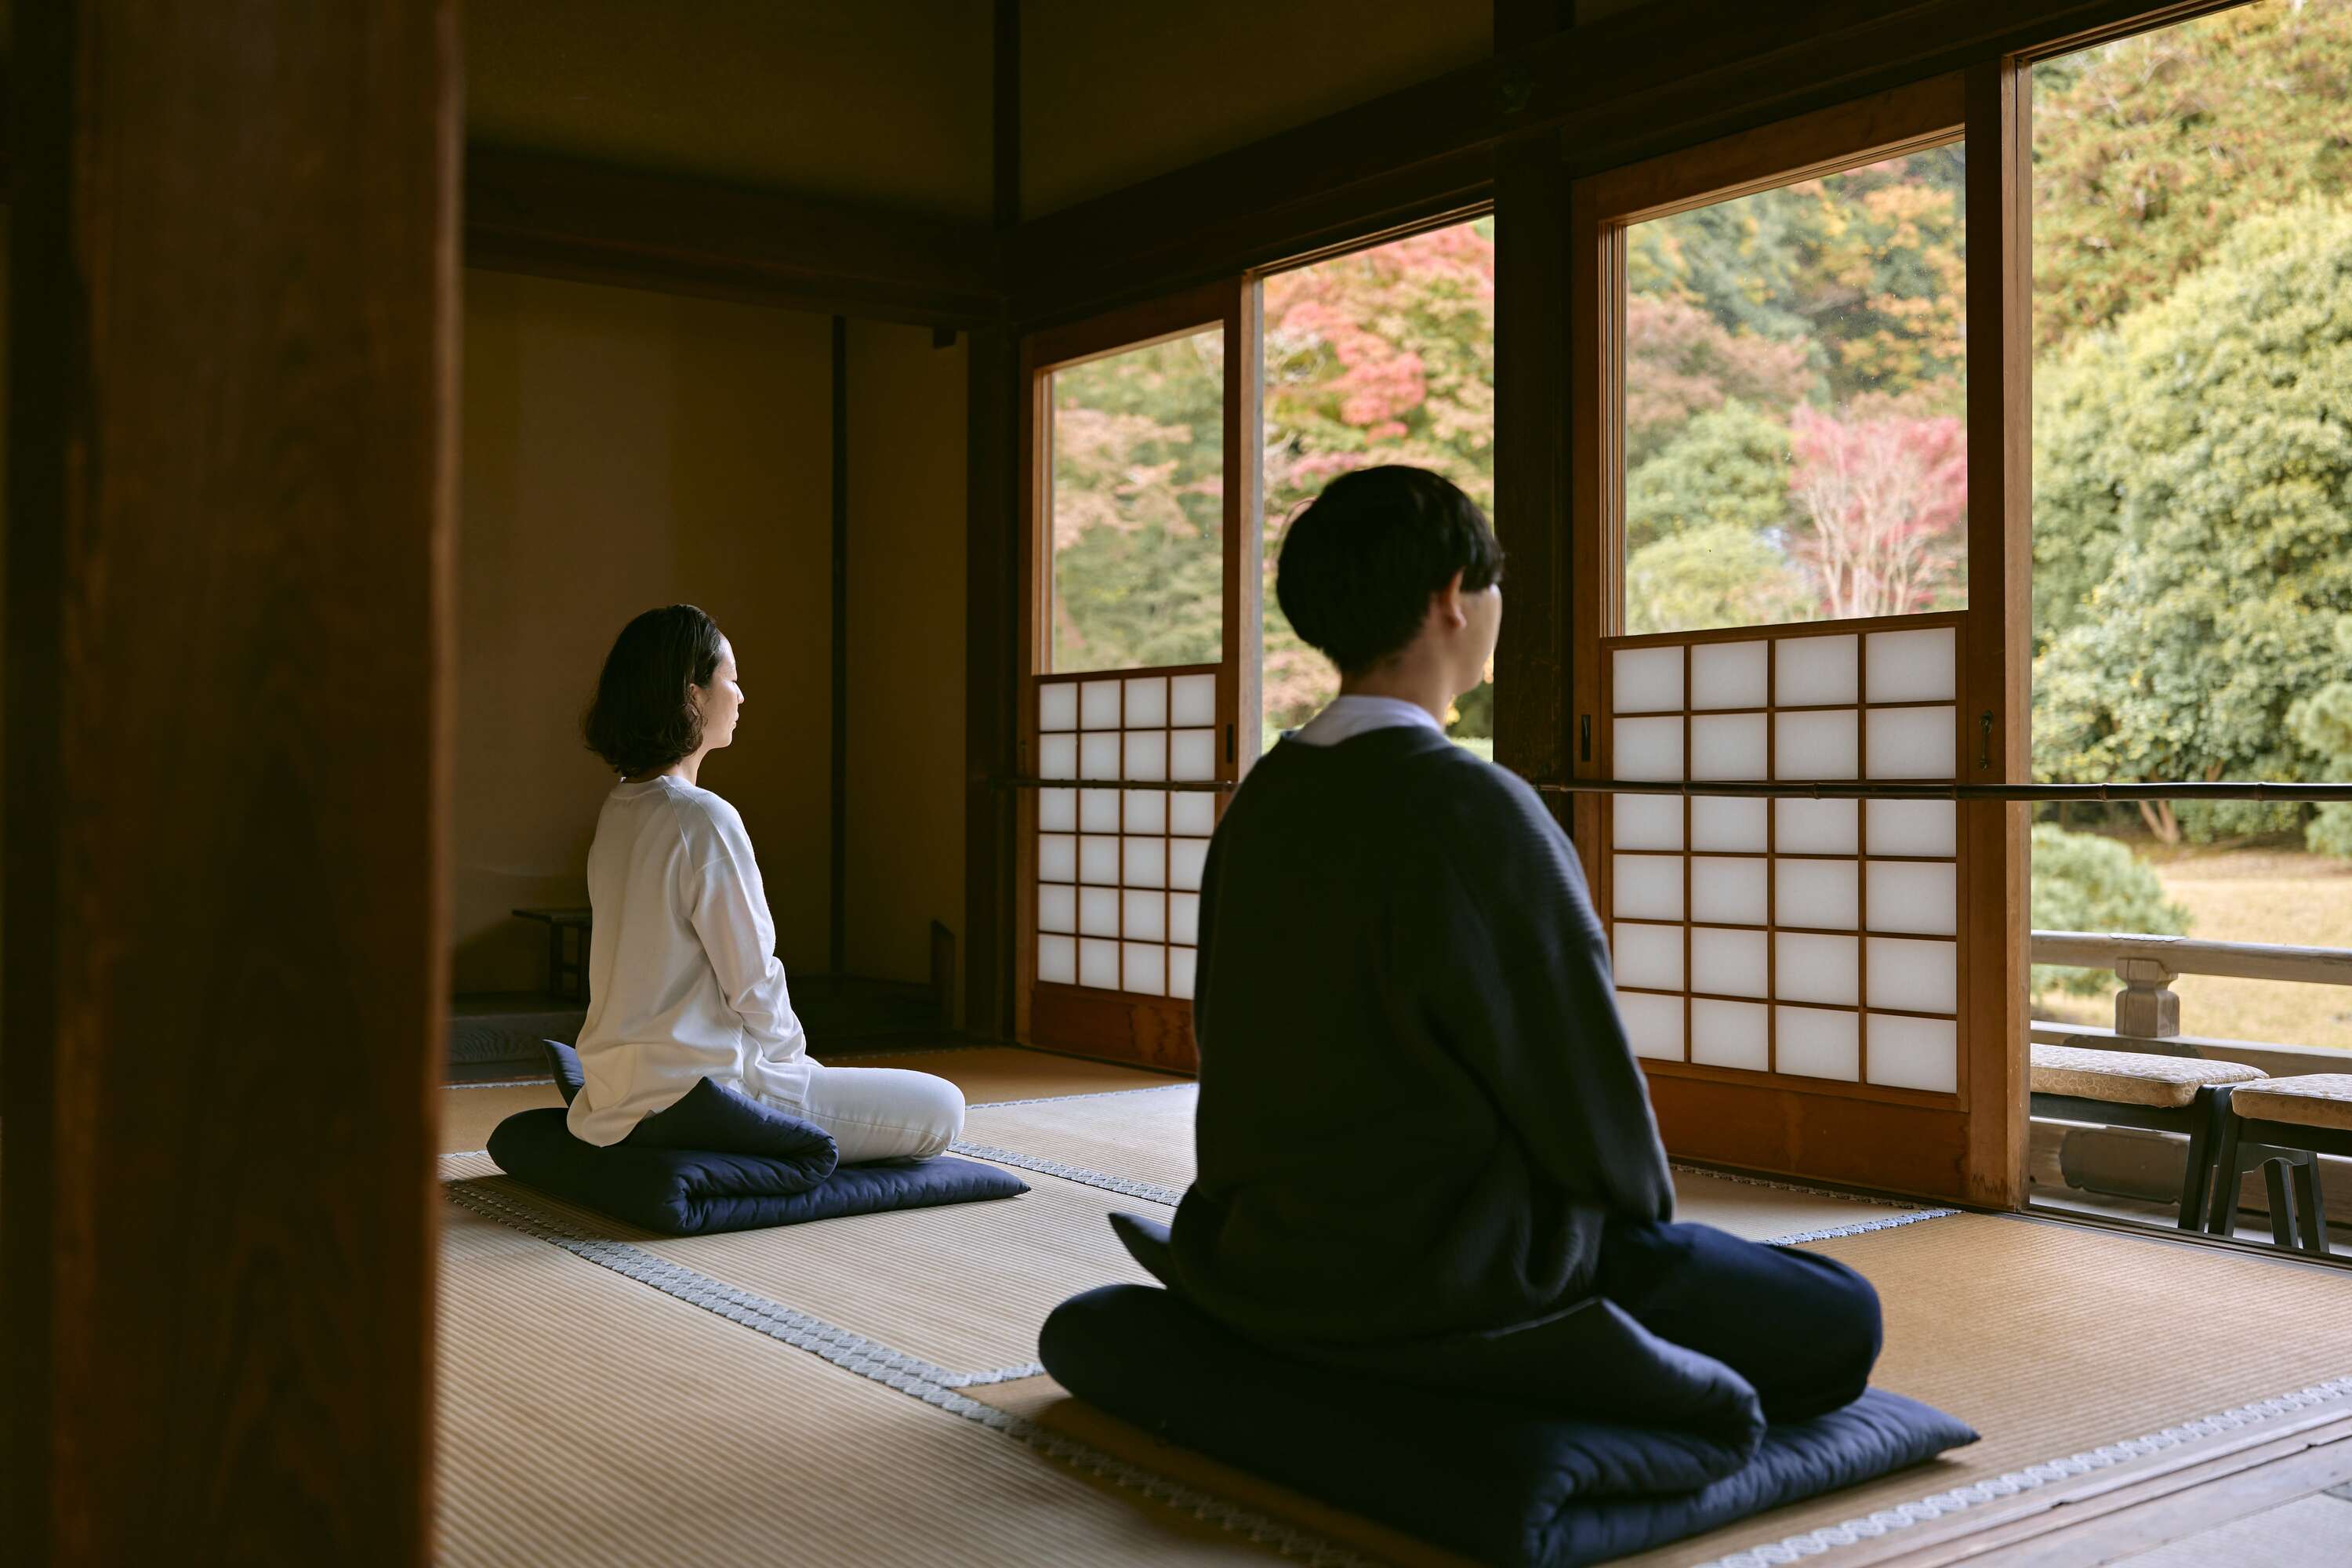 Engage with nature and spiritual traditions to understand Japan on another level.